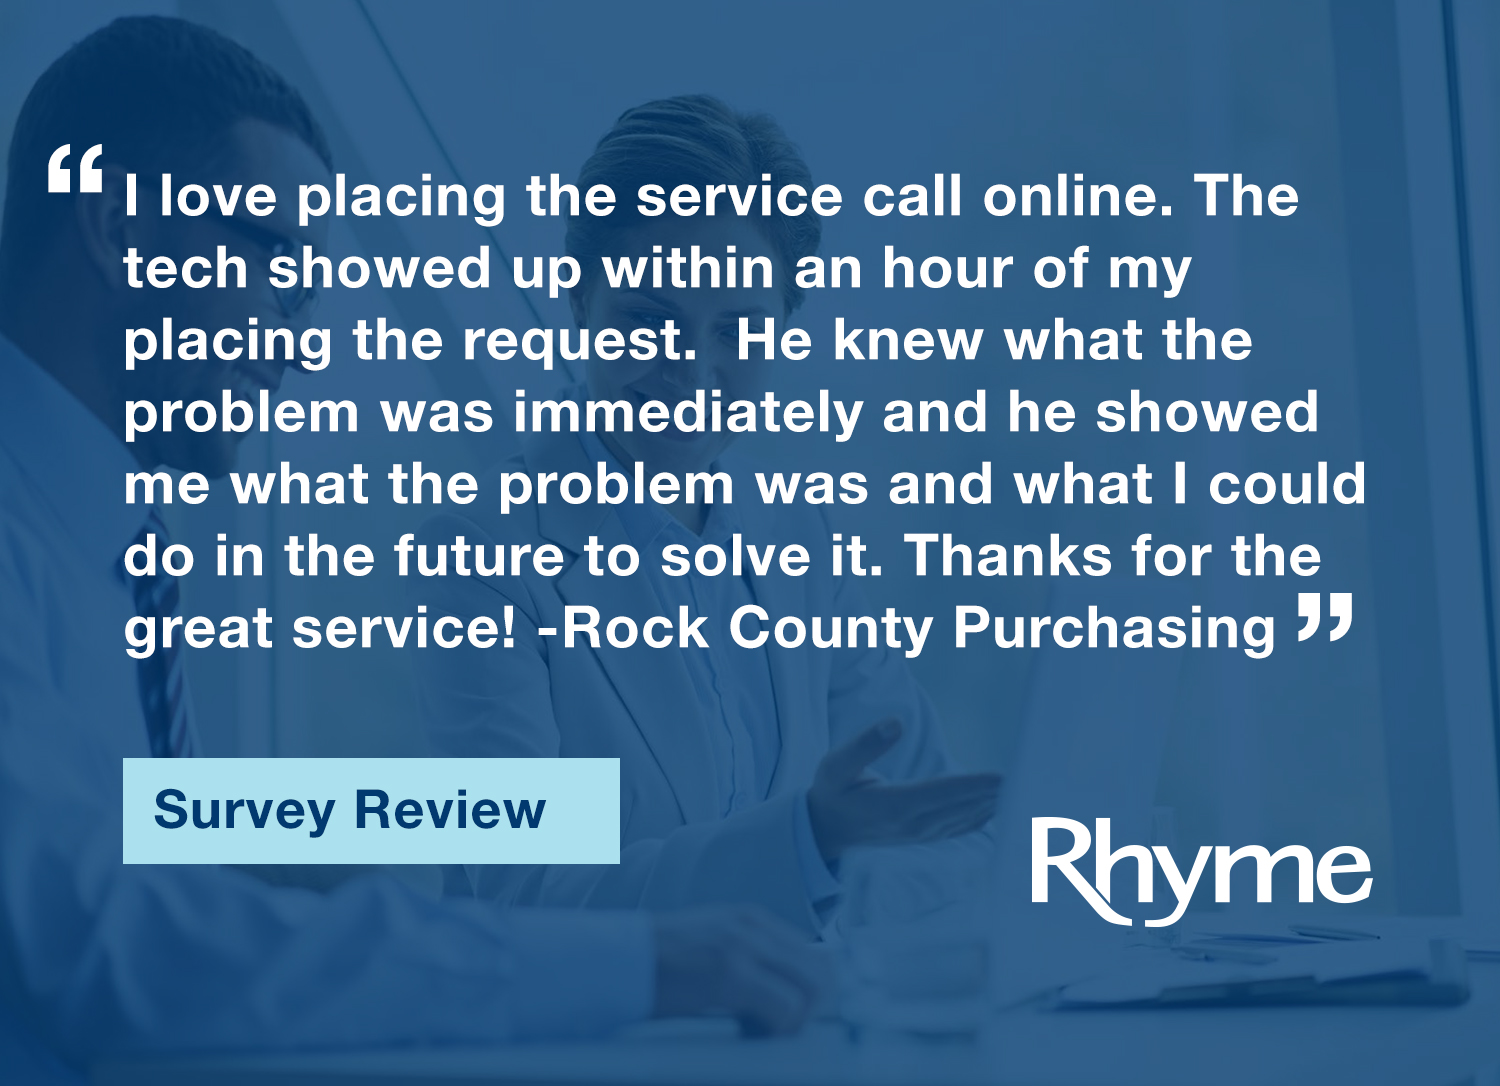 Rhyme customer service survey review